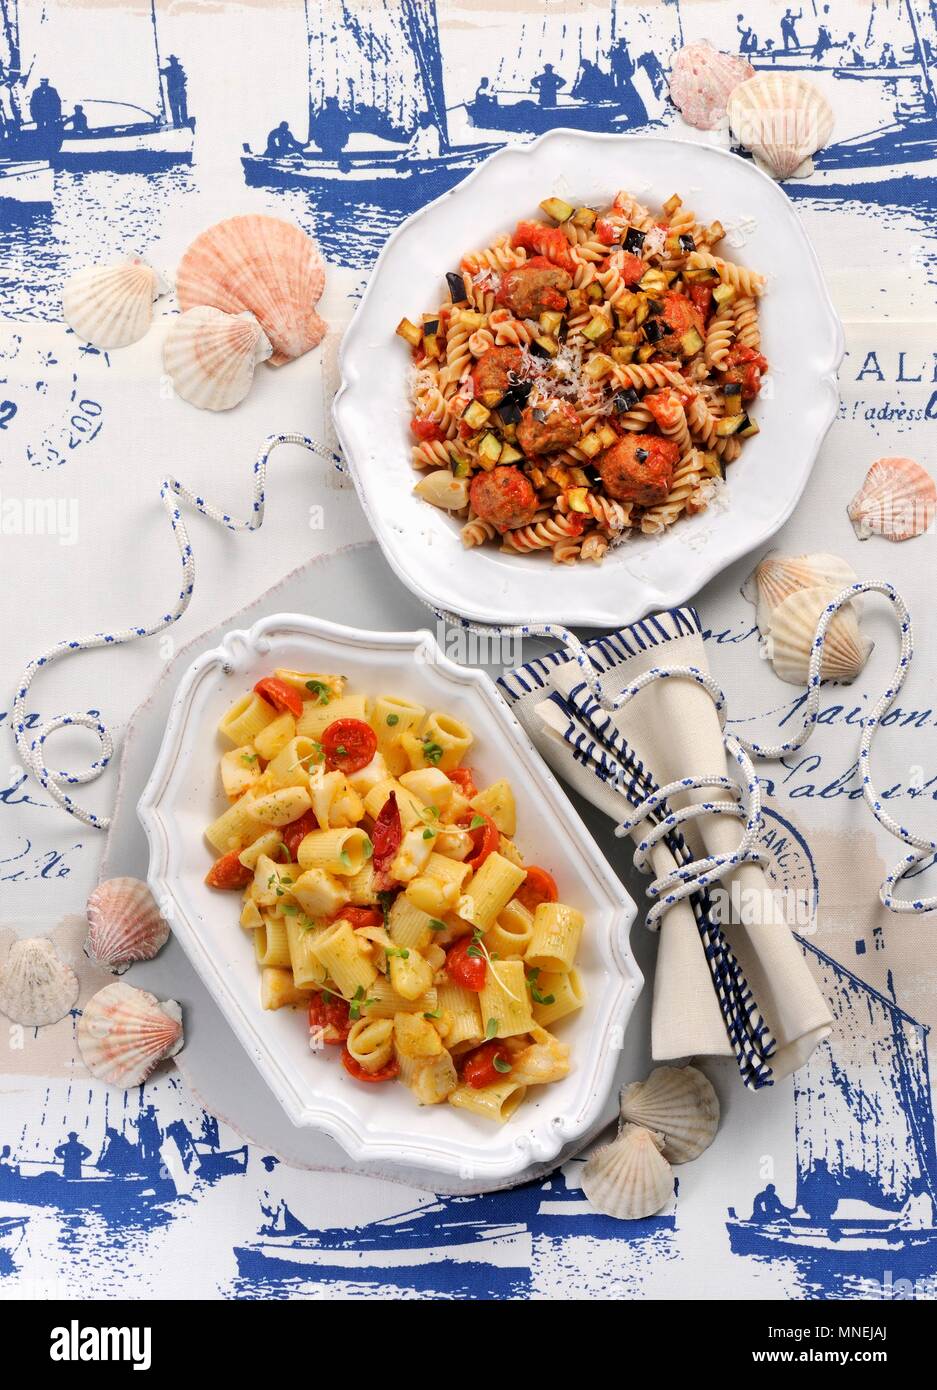 Fusilli with meat dumplings and aubergines, and pasta with potatoes and stock fish Stock Photo